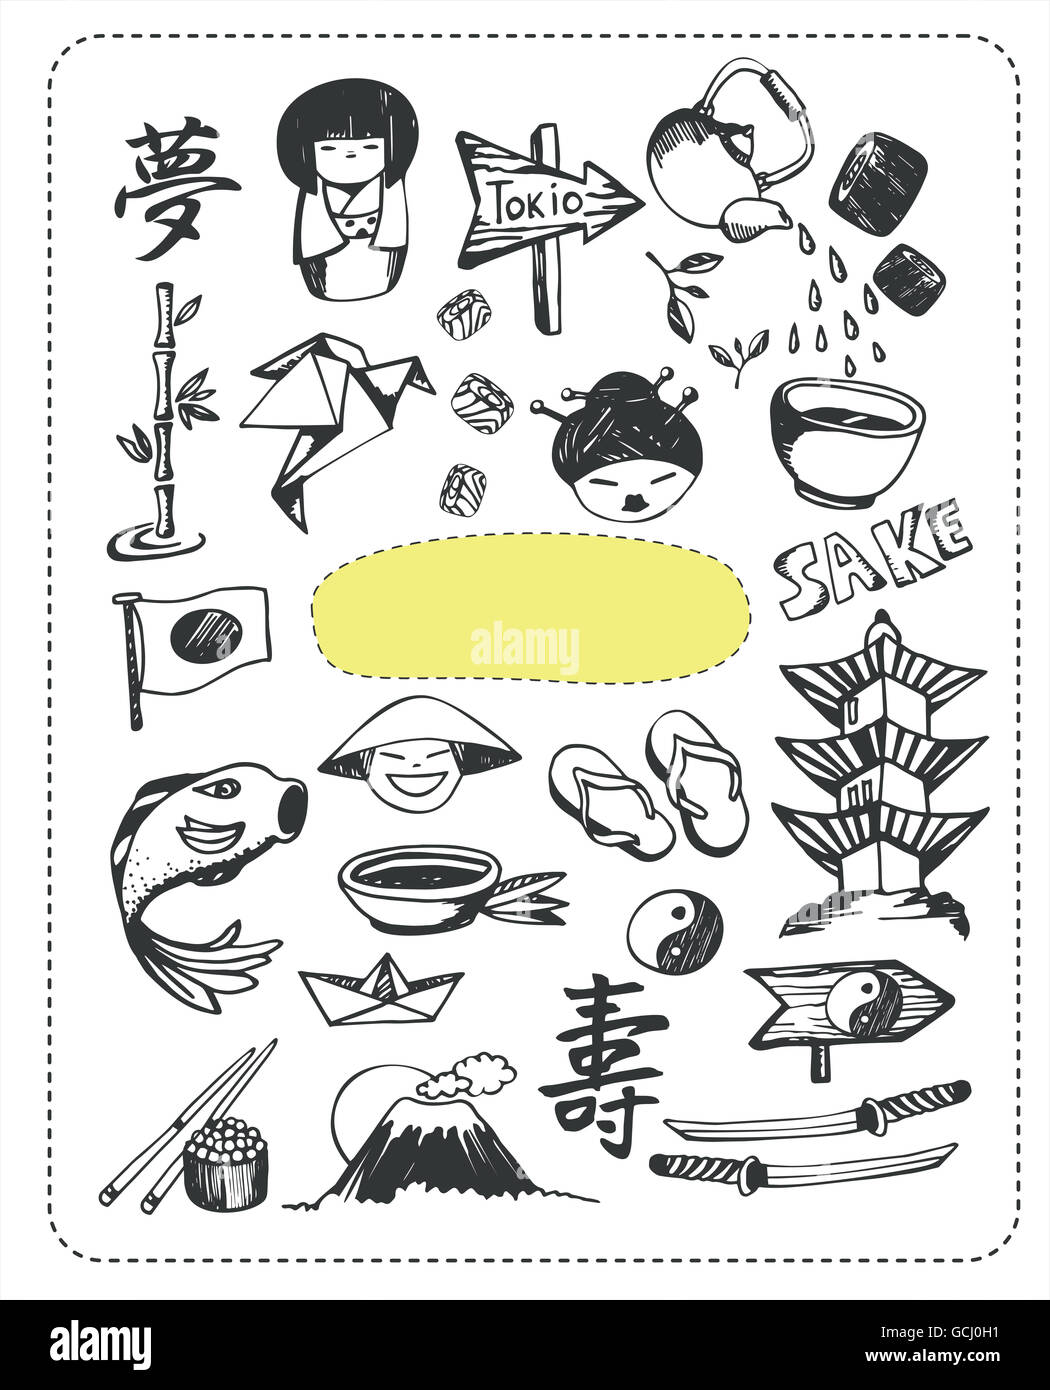 Doodle Icons Stock Photos Doodle Icons Stock Images Alamy